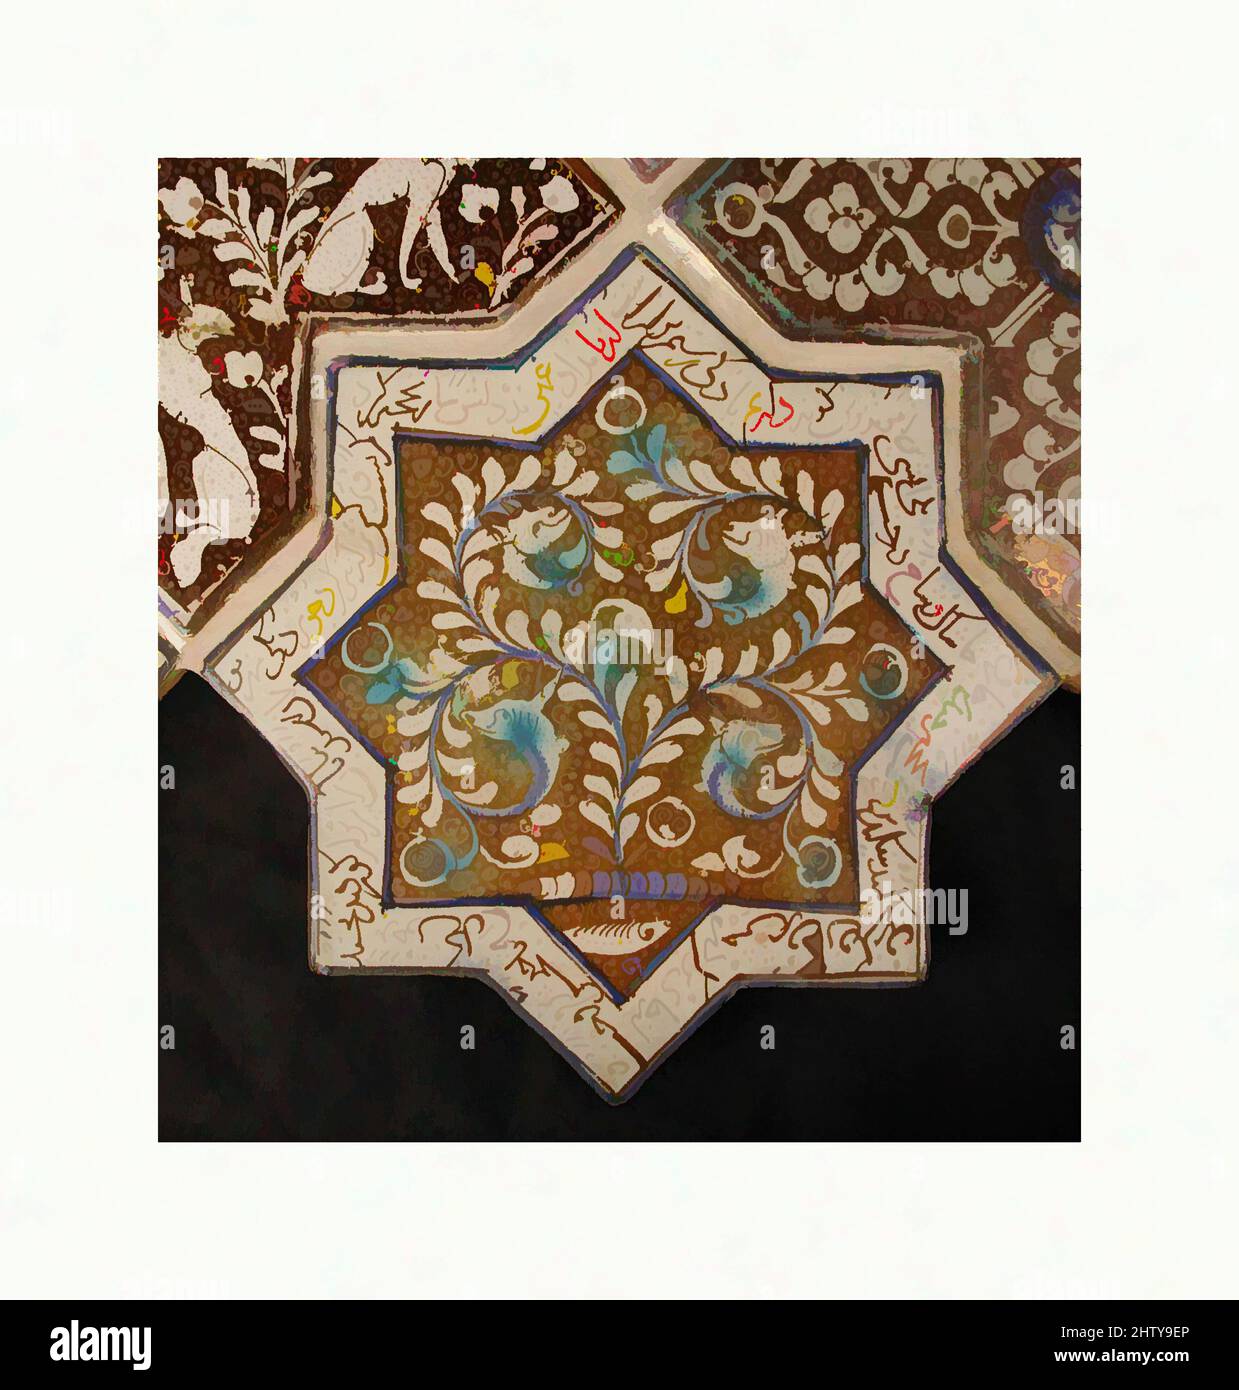 Art inspired by Star-Shaped Tile, 13th–14th century, Made in Iran, probably Kashan, Stonepaste; inglaze painted in blue and turquoise and luster-painted on opaque white glaze, 8 in. (20.3 cm), Ceramics-Tiles, This eight-pointed star tile was once part of a panel of star- and cross-, Classic works modernized by Artotop with a splash of modernity. Shapes, color and value, eye-catching visual impact on art. Emotions through freedom of artworks in a contemporary way. A timeless message pursuing a wildly creative new direction. Artists turning to the digital medium and creating the Artotop NFT Stock Photo